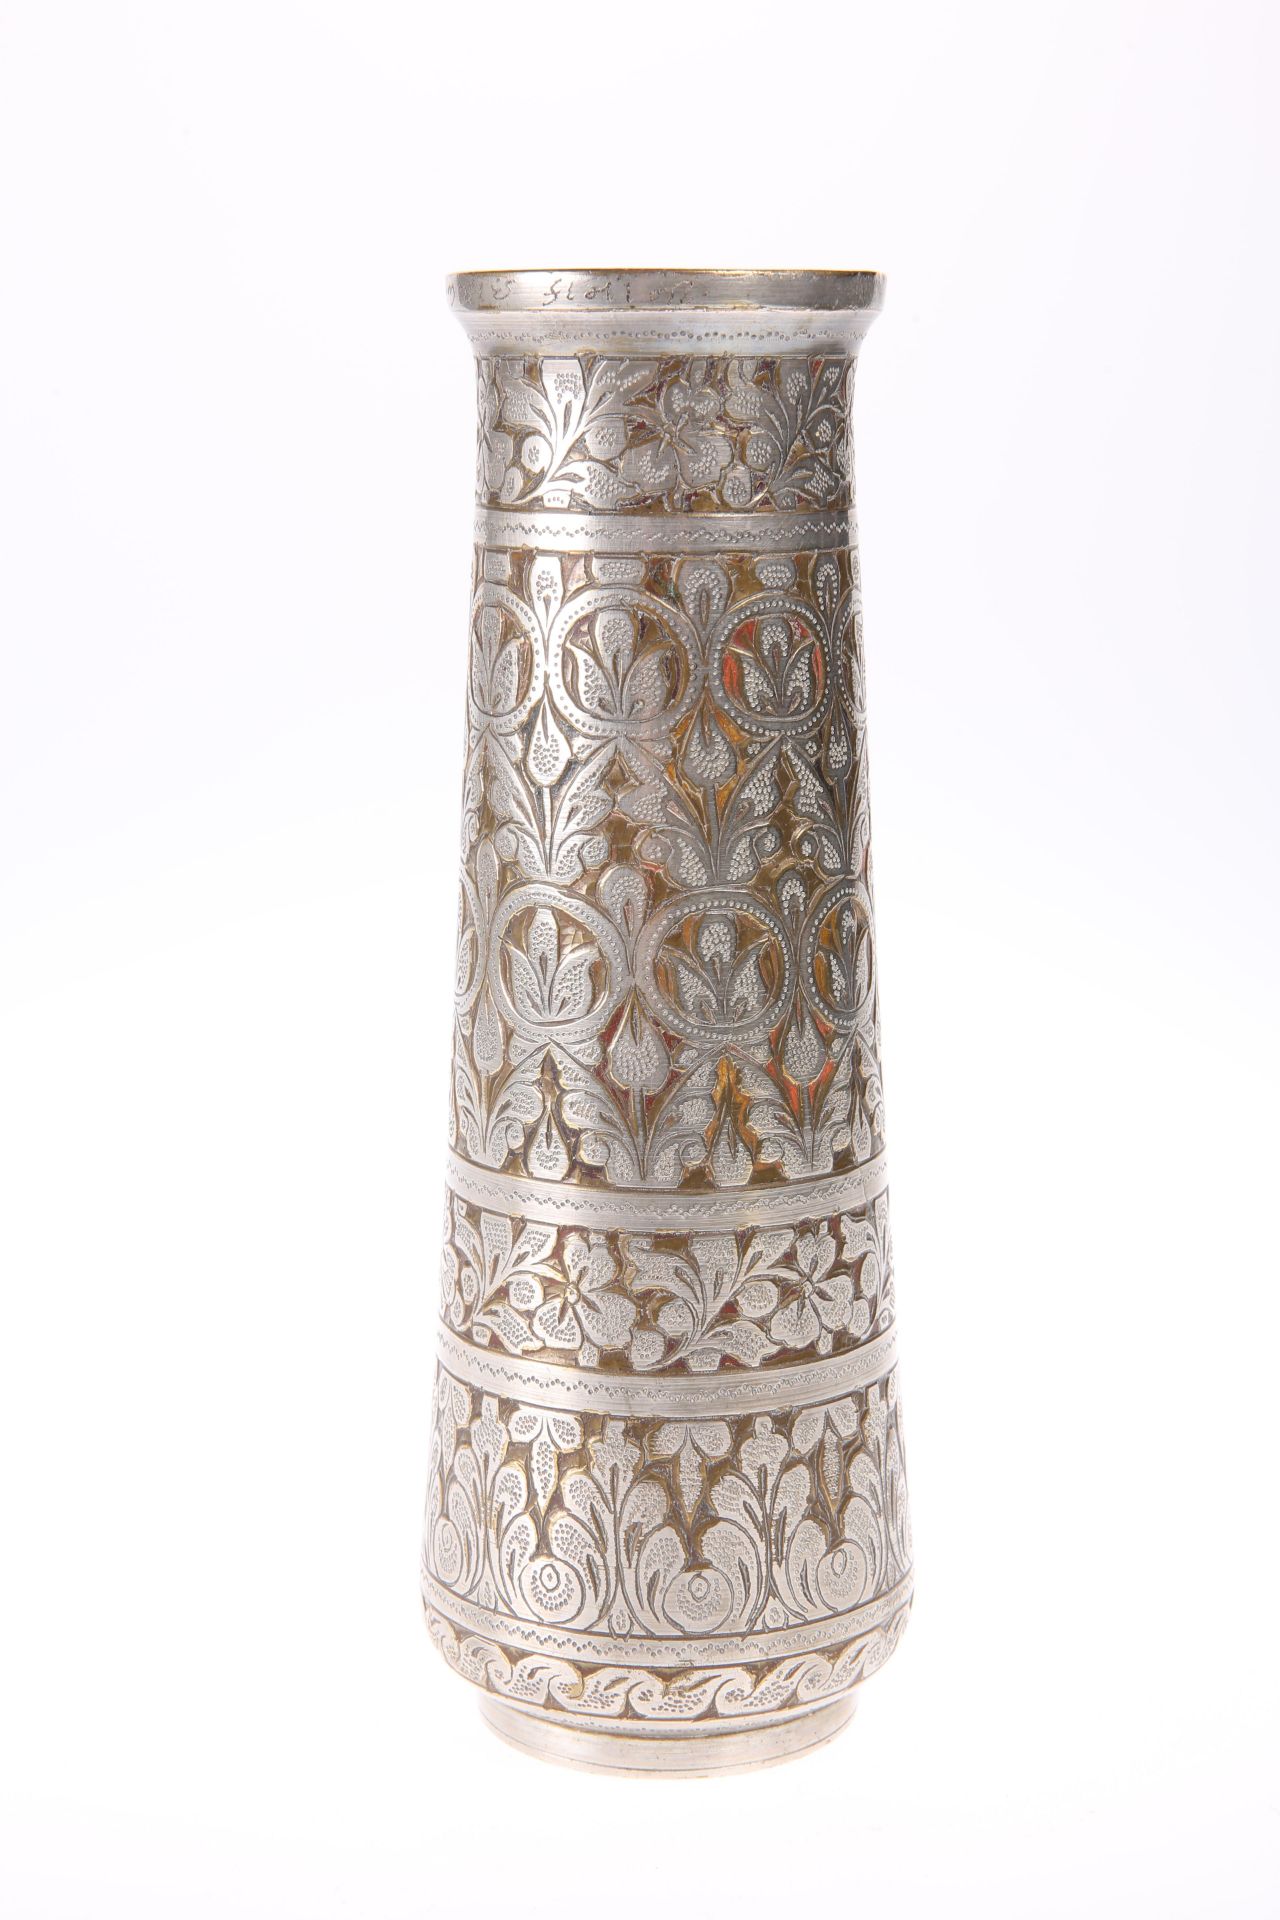 AN INDIAN SILVERED BRASS VASE, EARLY 20TH CENTURY, of tapering cylindrical form. 22cm